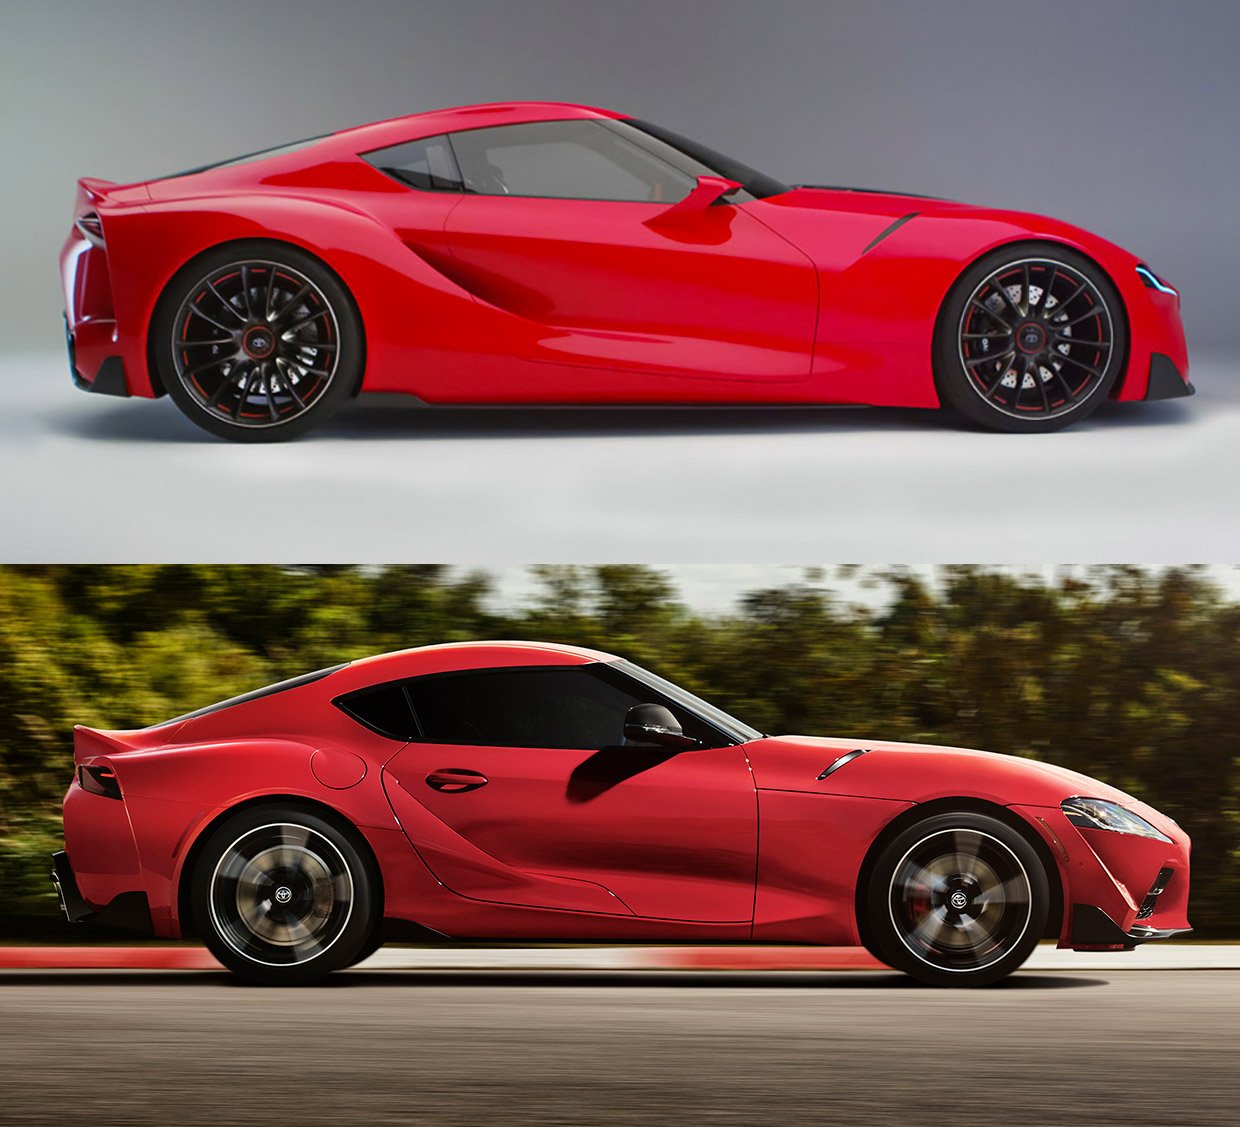 2020 Toyota Supra Gets Official: Specs, Price, and Details